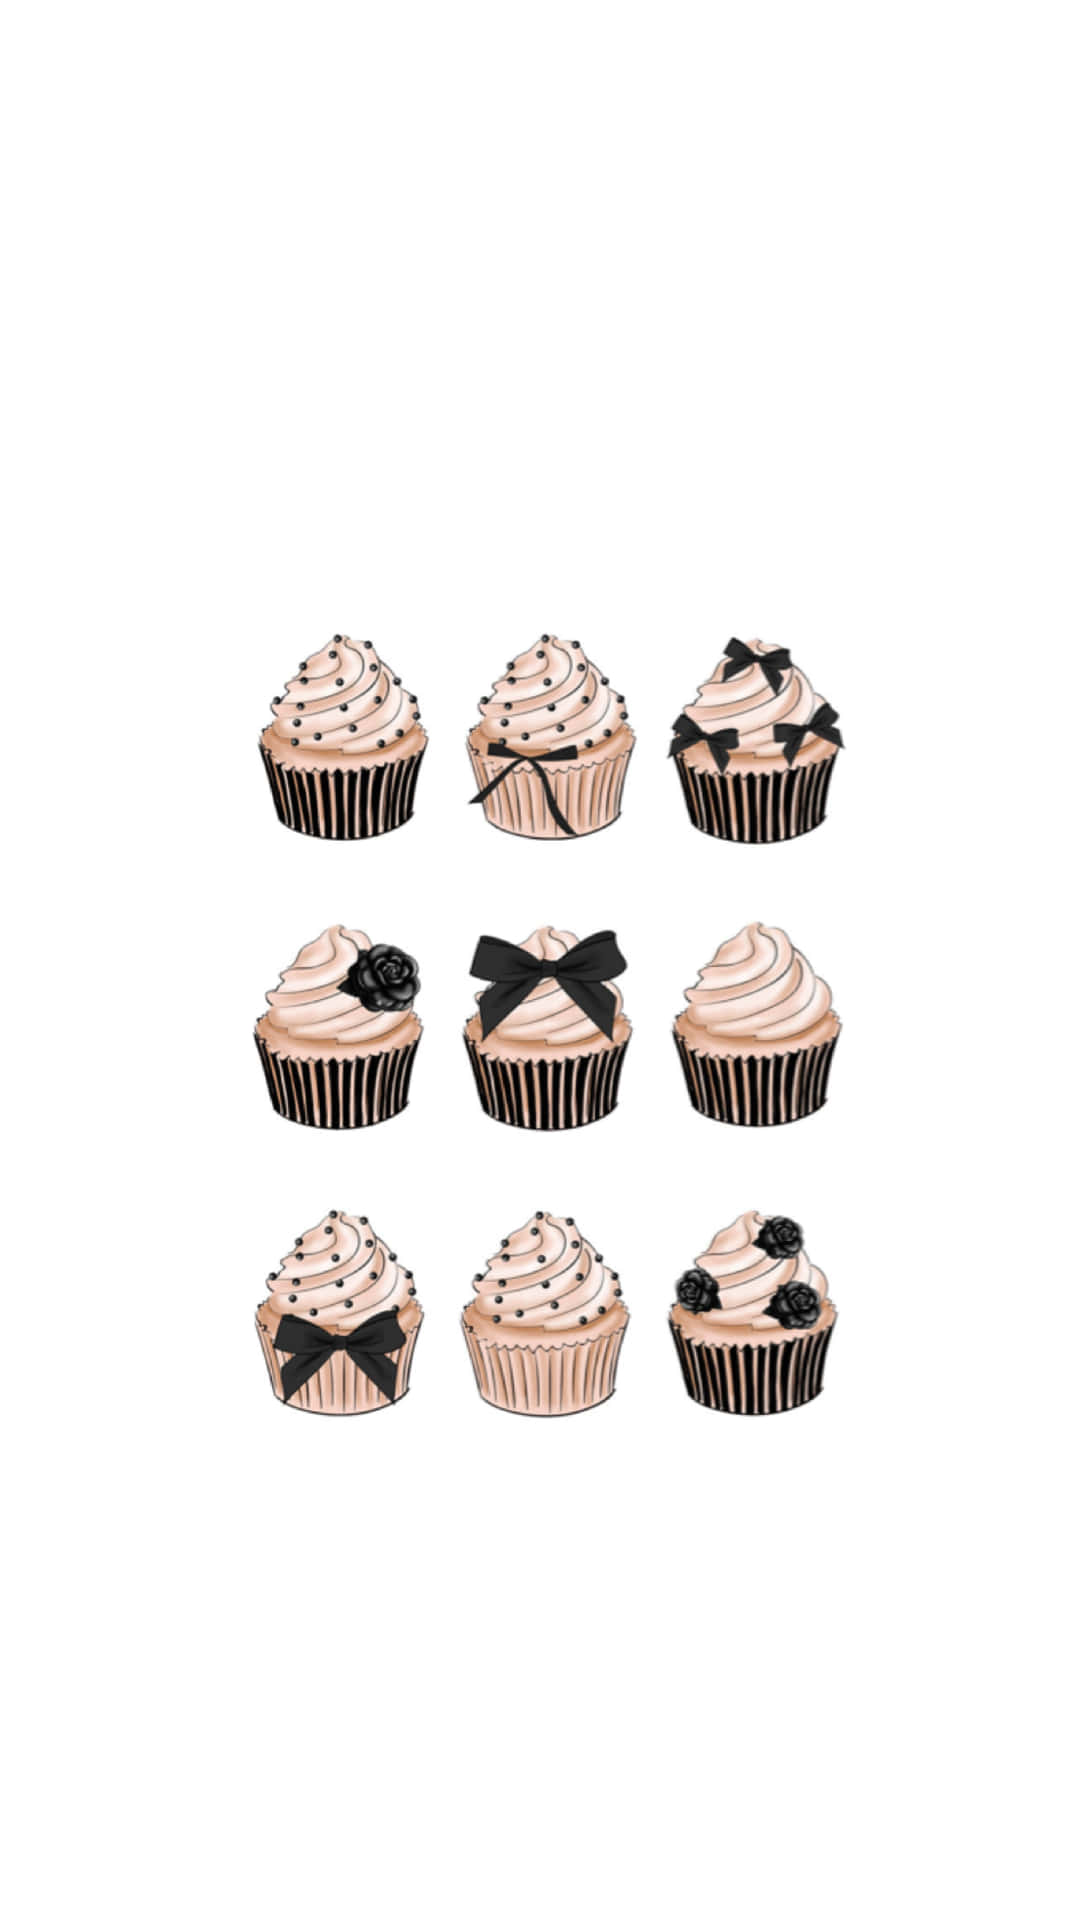 A set of cupcakes with black bows on them - Cake